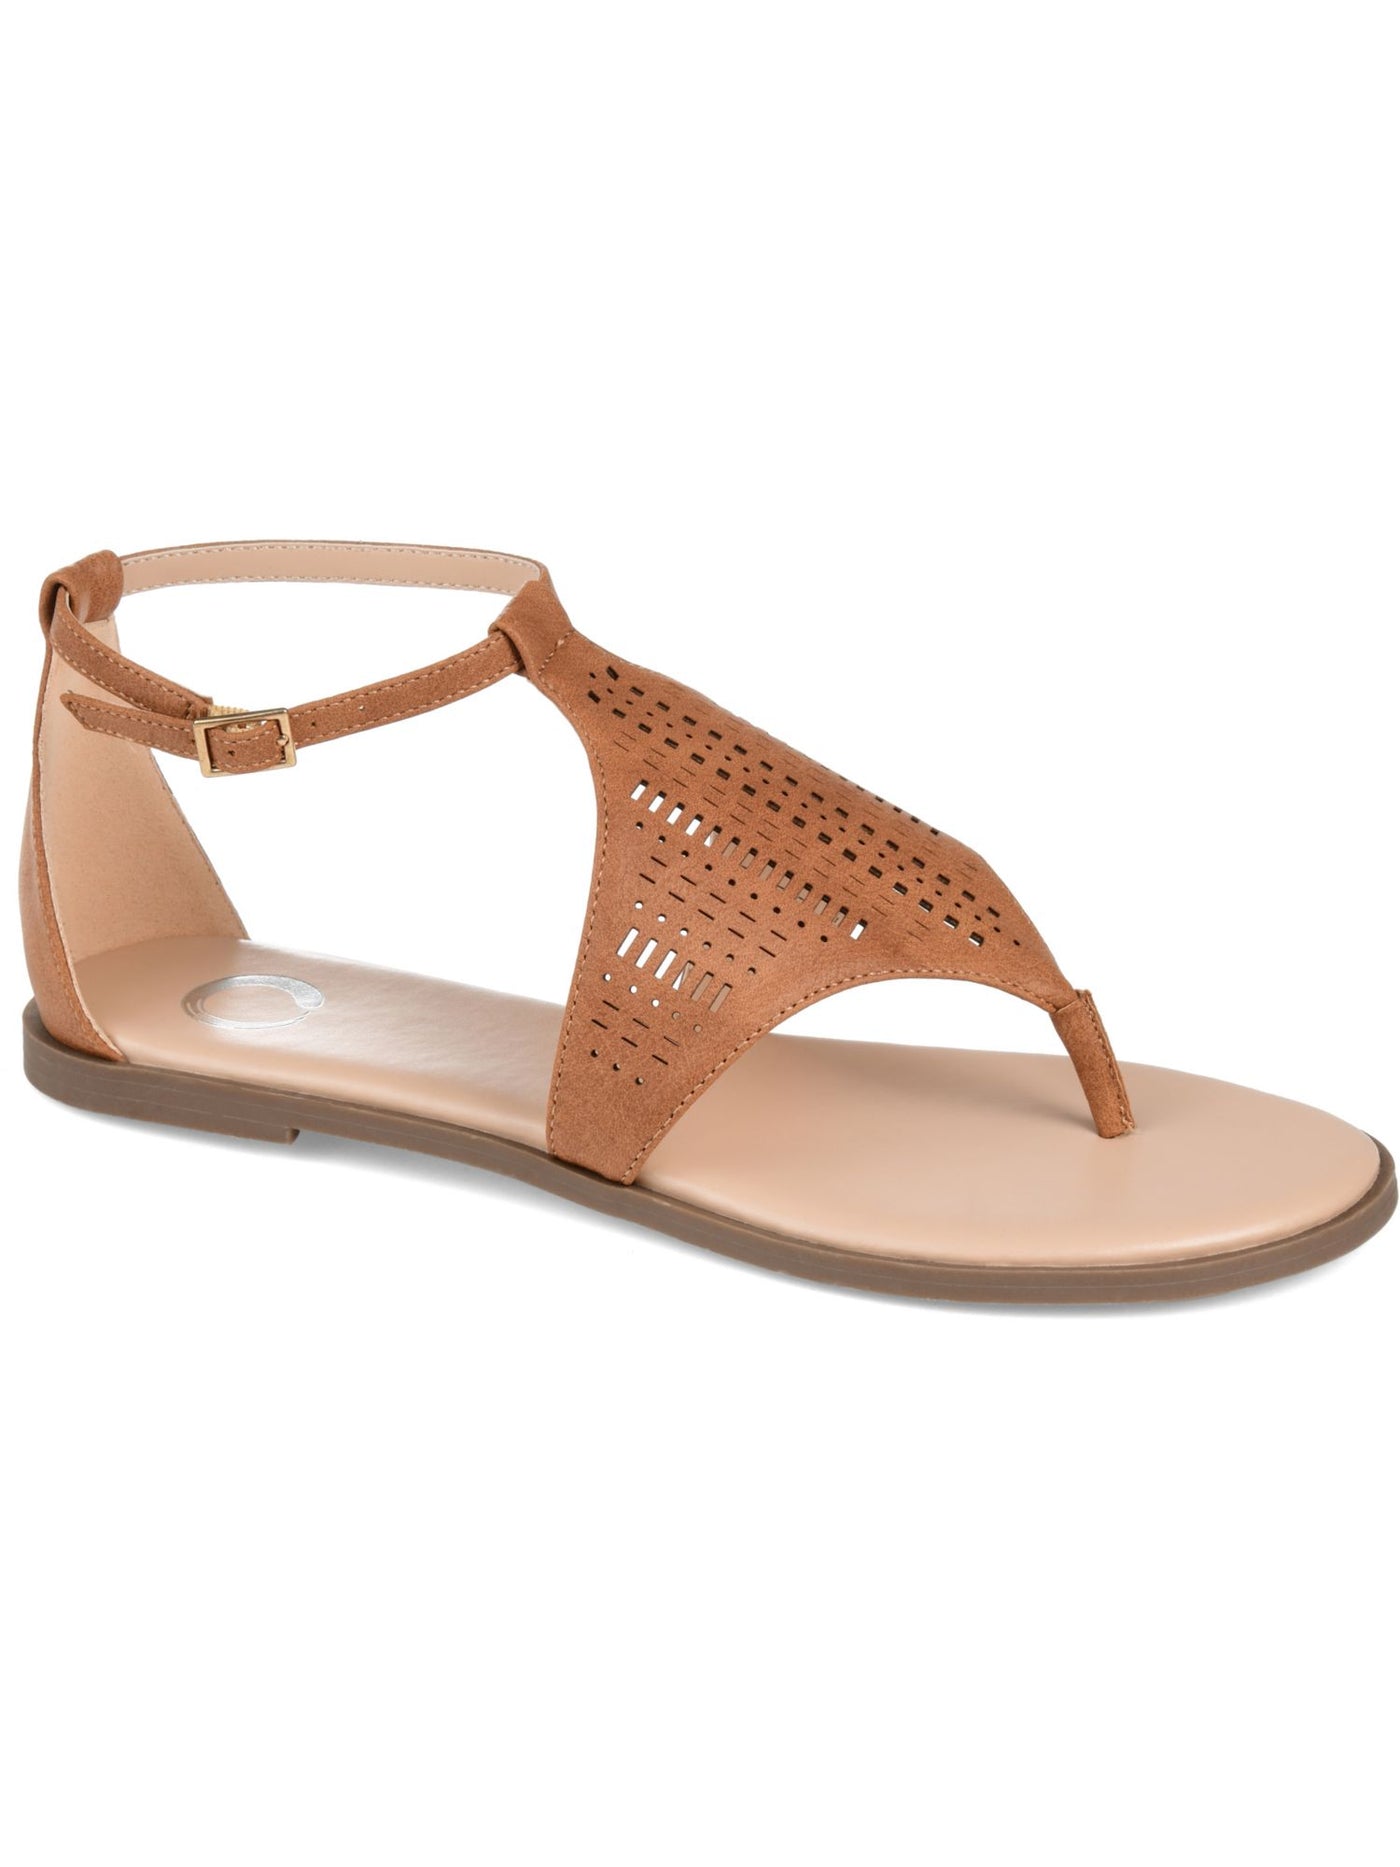 JOURNEE COLLECTION Womens Brown Laser Cut Half-Caged Design Cushioned Ankle Strap Niobi Round Toe Buckle Thong Sandals Shoes 7.5 M